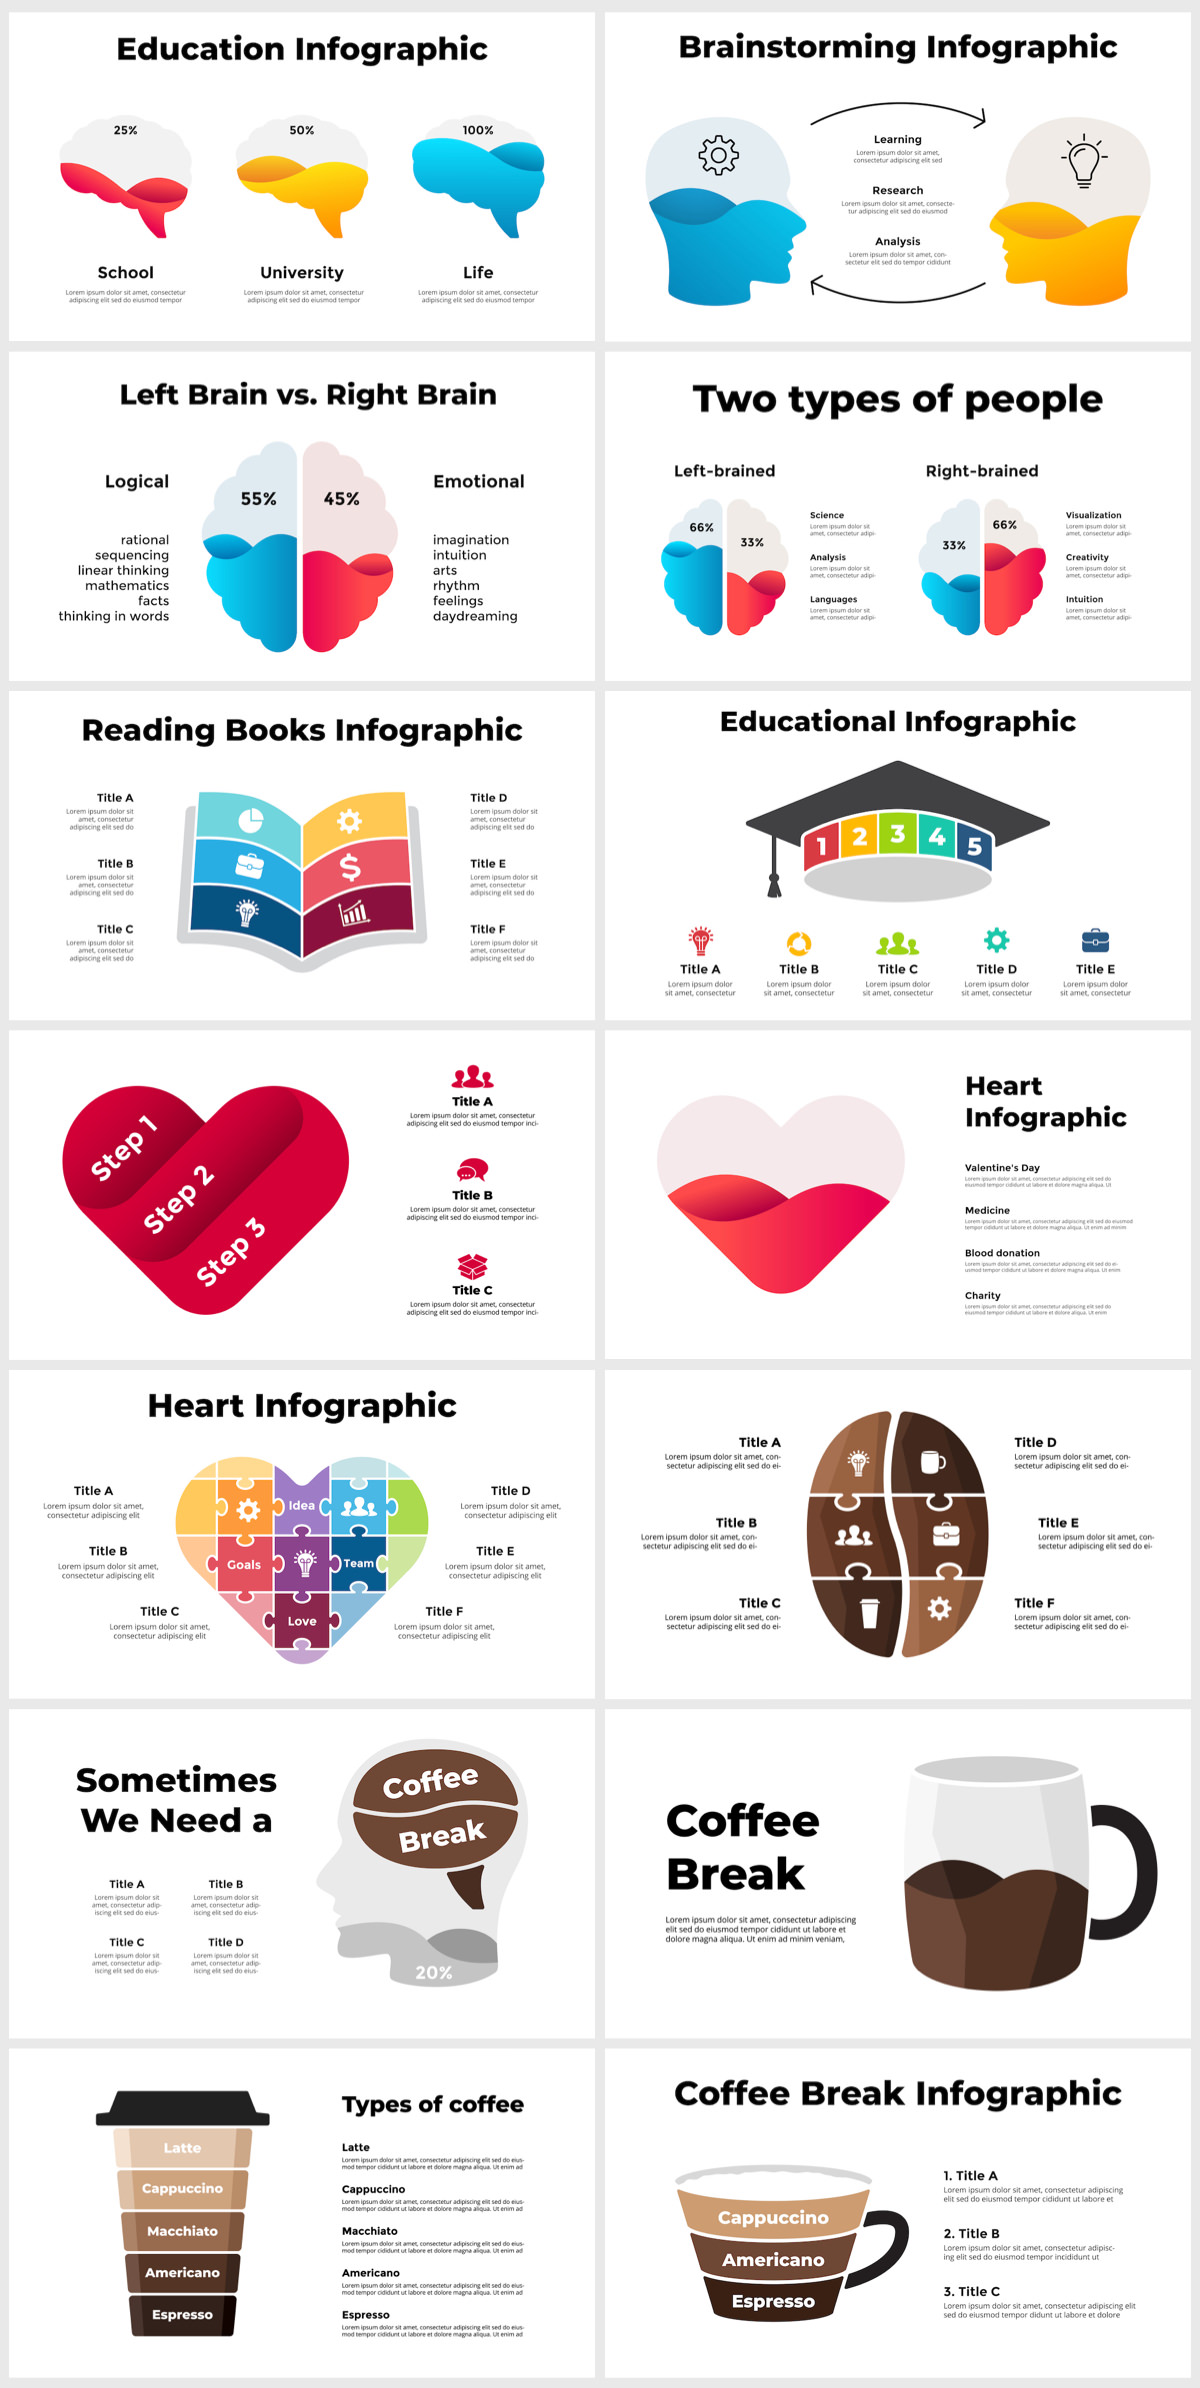 Wowly - 3500 Infographics & Presentation Templates! Updated! PowerPoint Canva Figma Sketch Ai Psd. - 166